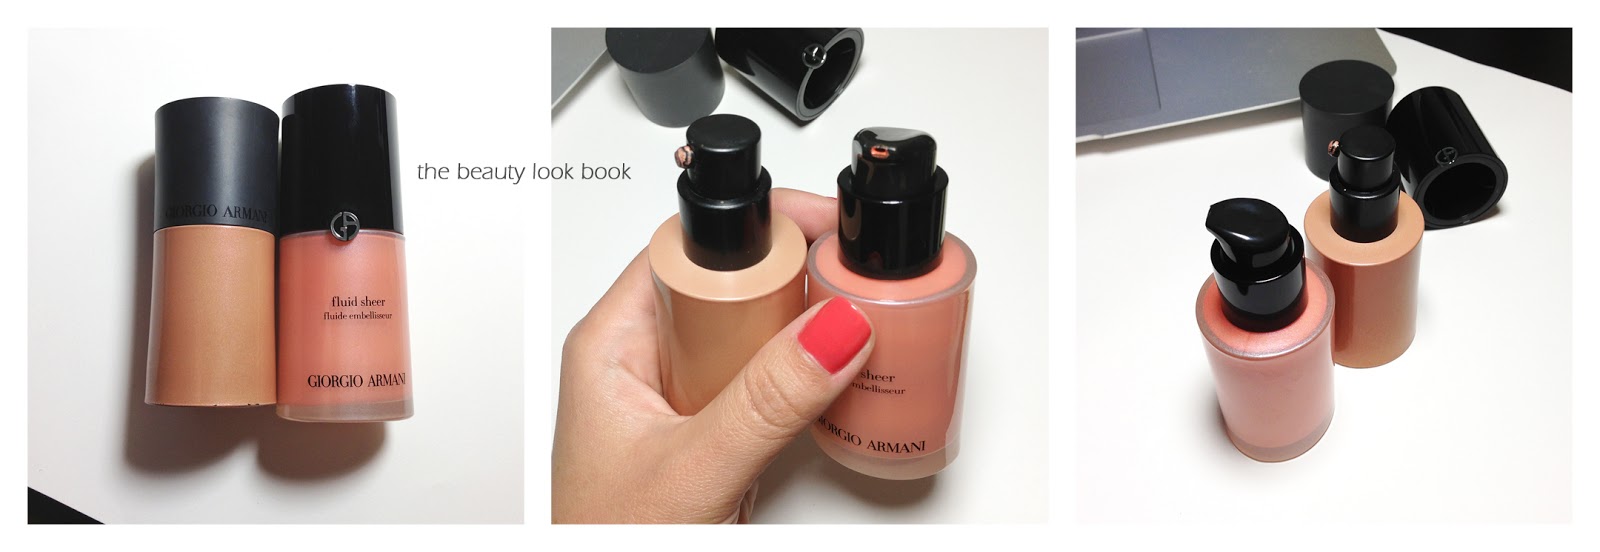 Armani Fluid Sheer #5 and #8 - Shade Extensions - The Beauty Look Book